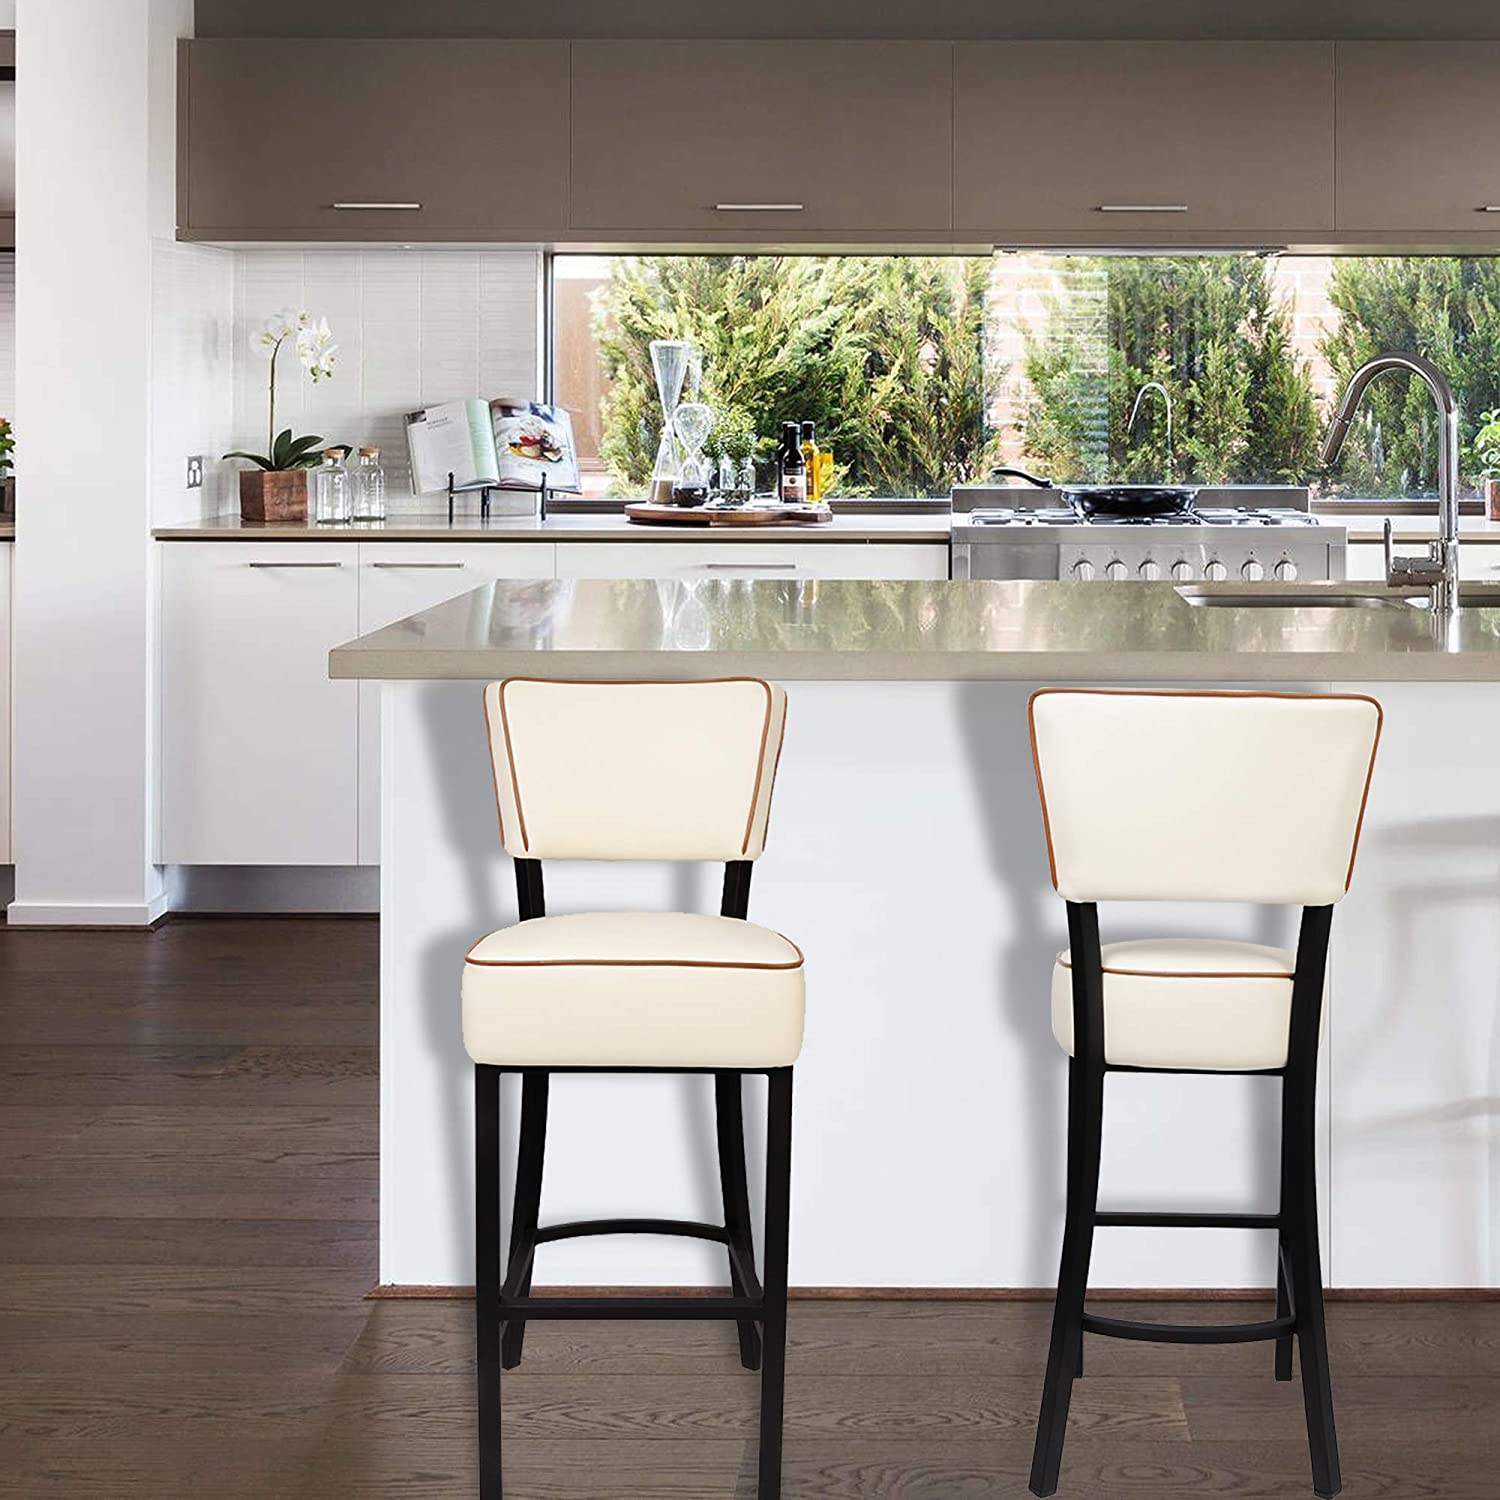 30” Bar Stools Set of 2 Kitchen Chairs Counter Pub Height Leather Modern Breakfast Dining Chairs Home Furniture, Beige